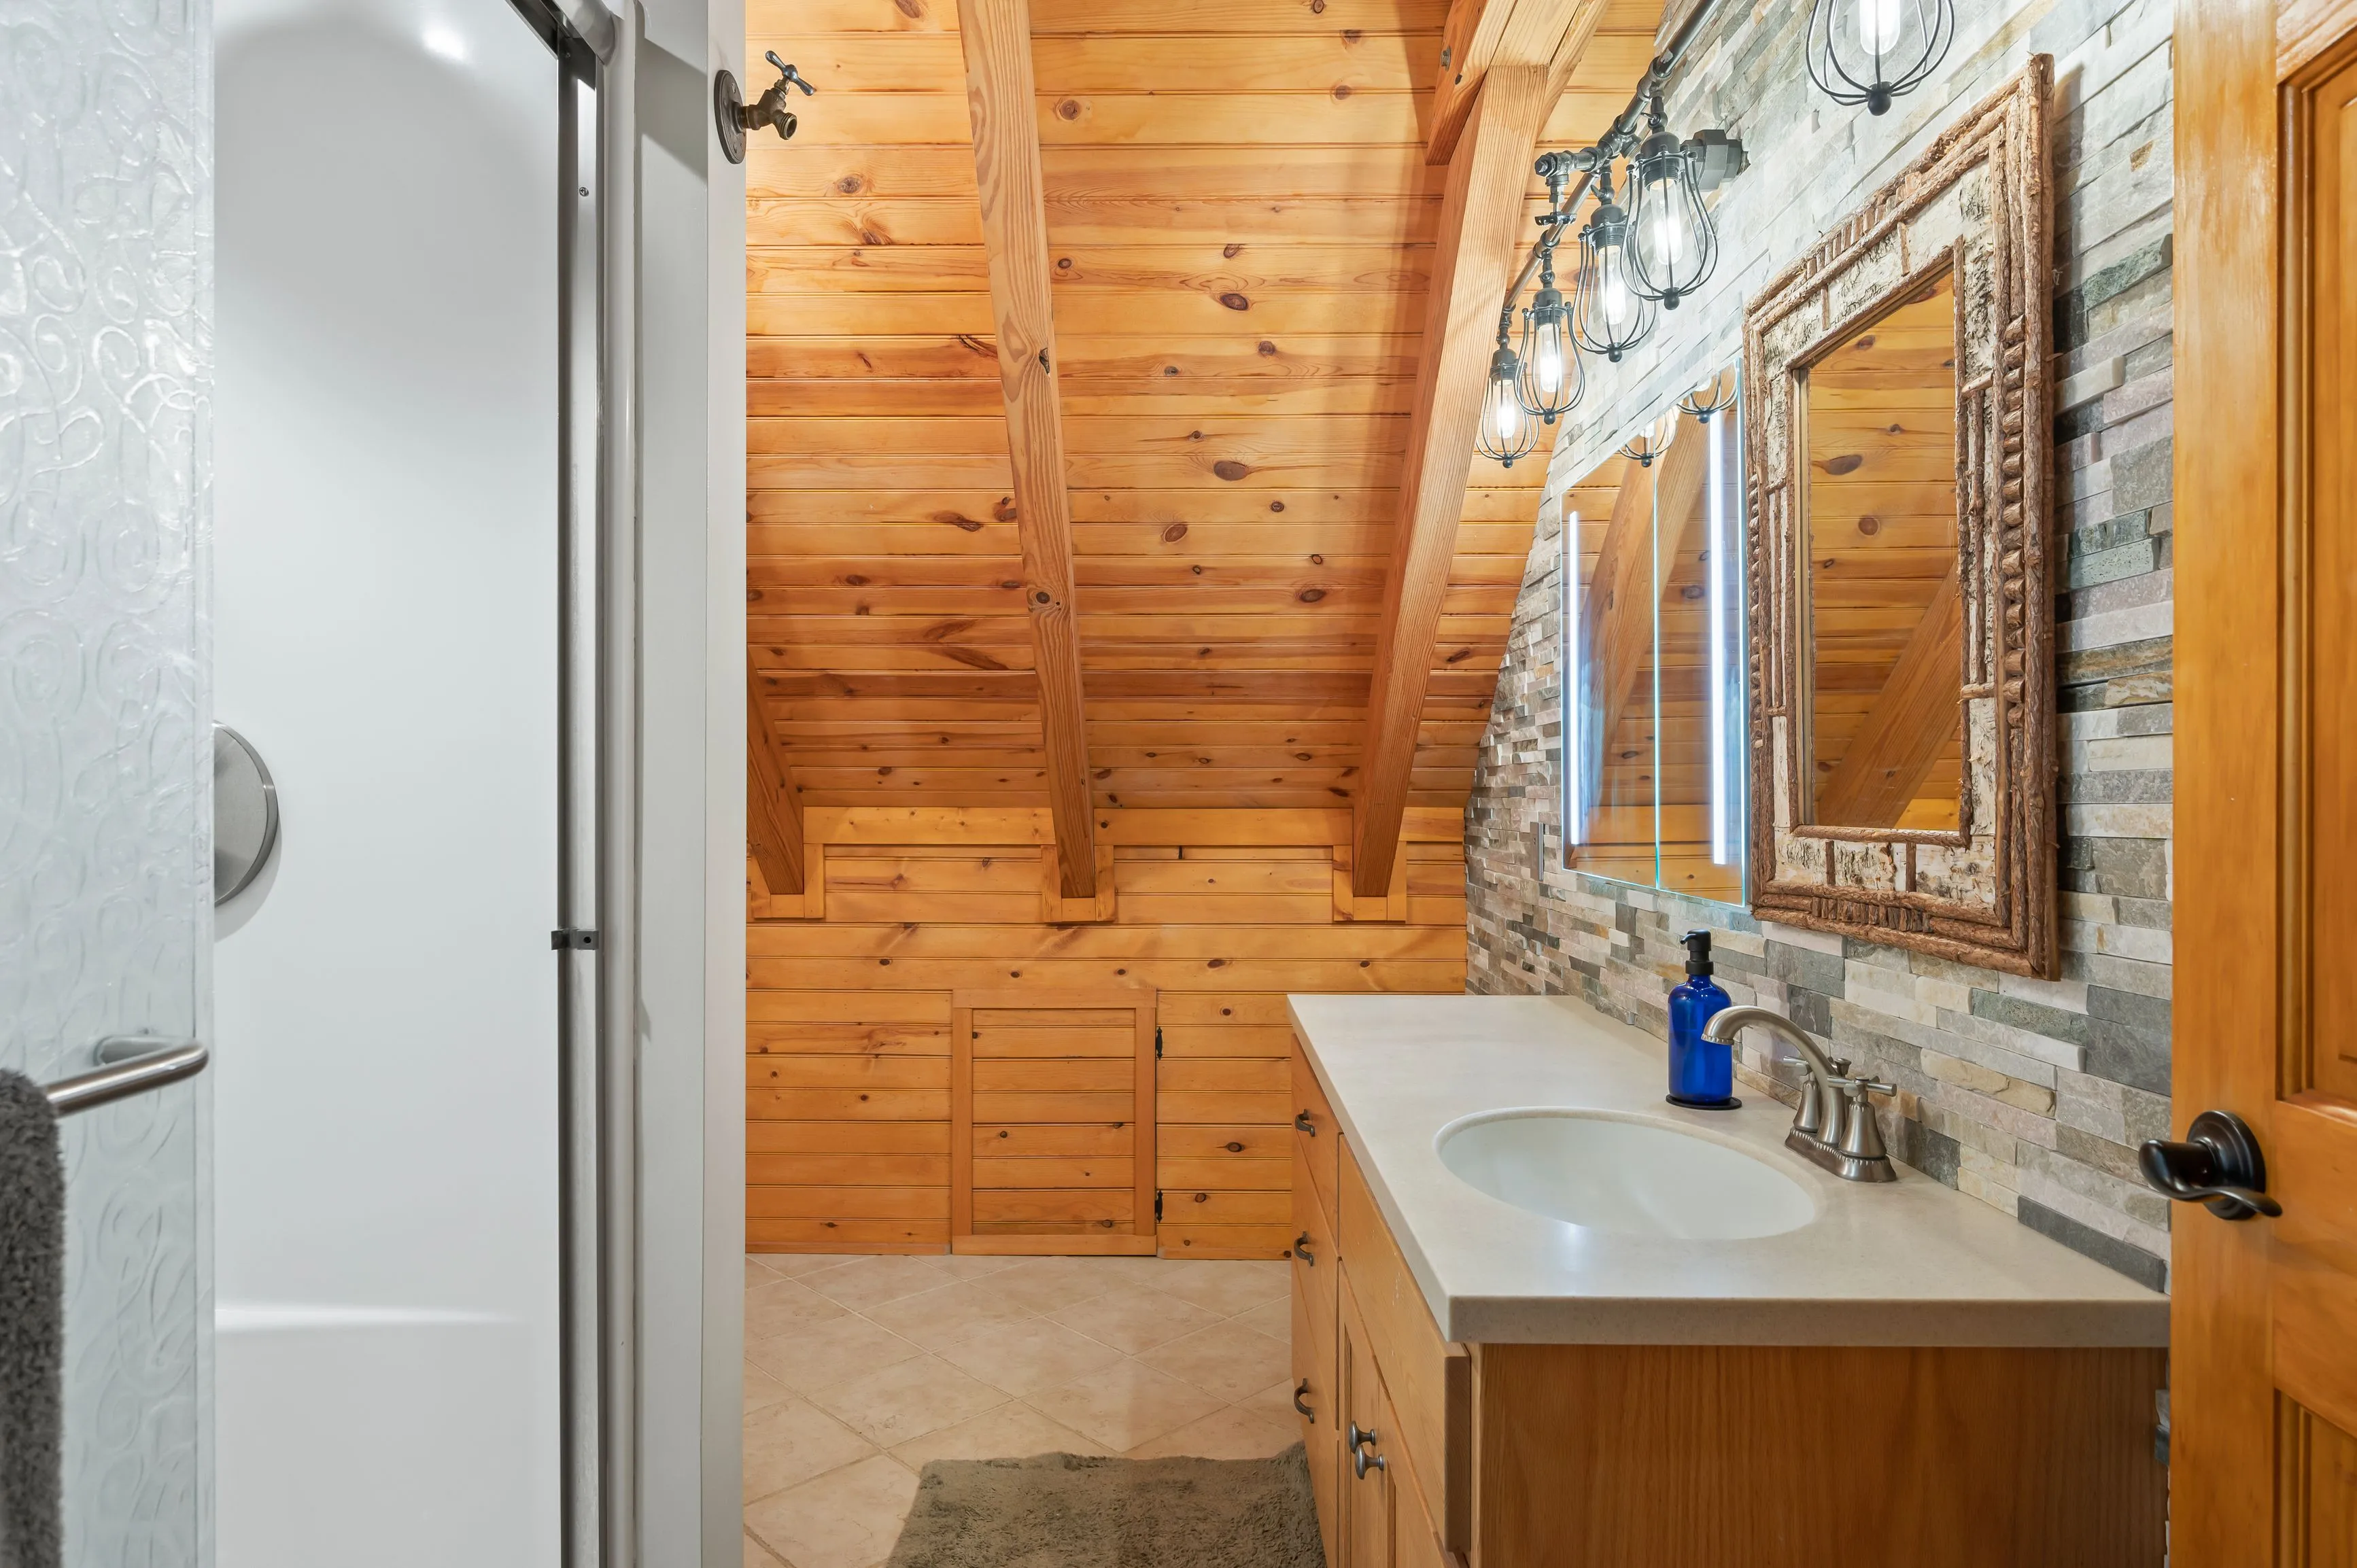 Interior of a rustic bathroom with wooden walls, a white sink, mirror, and a glass shower door.